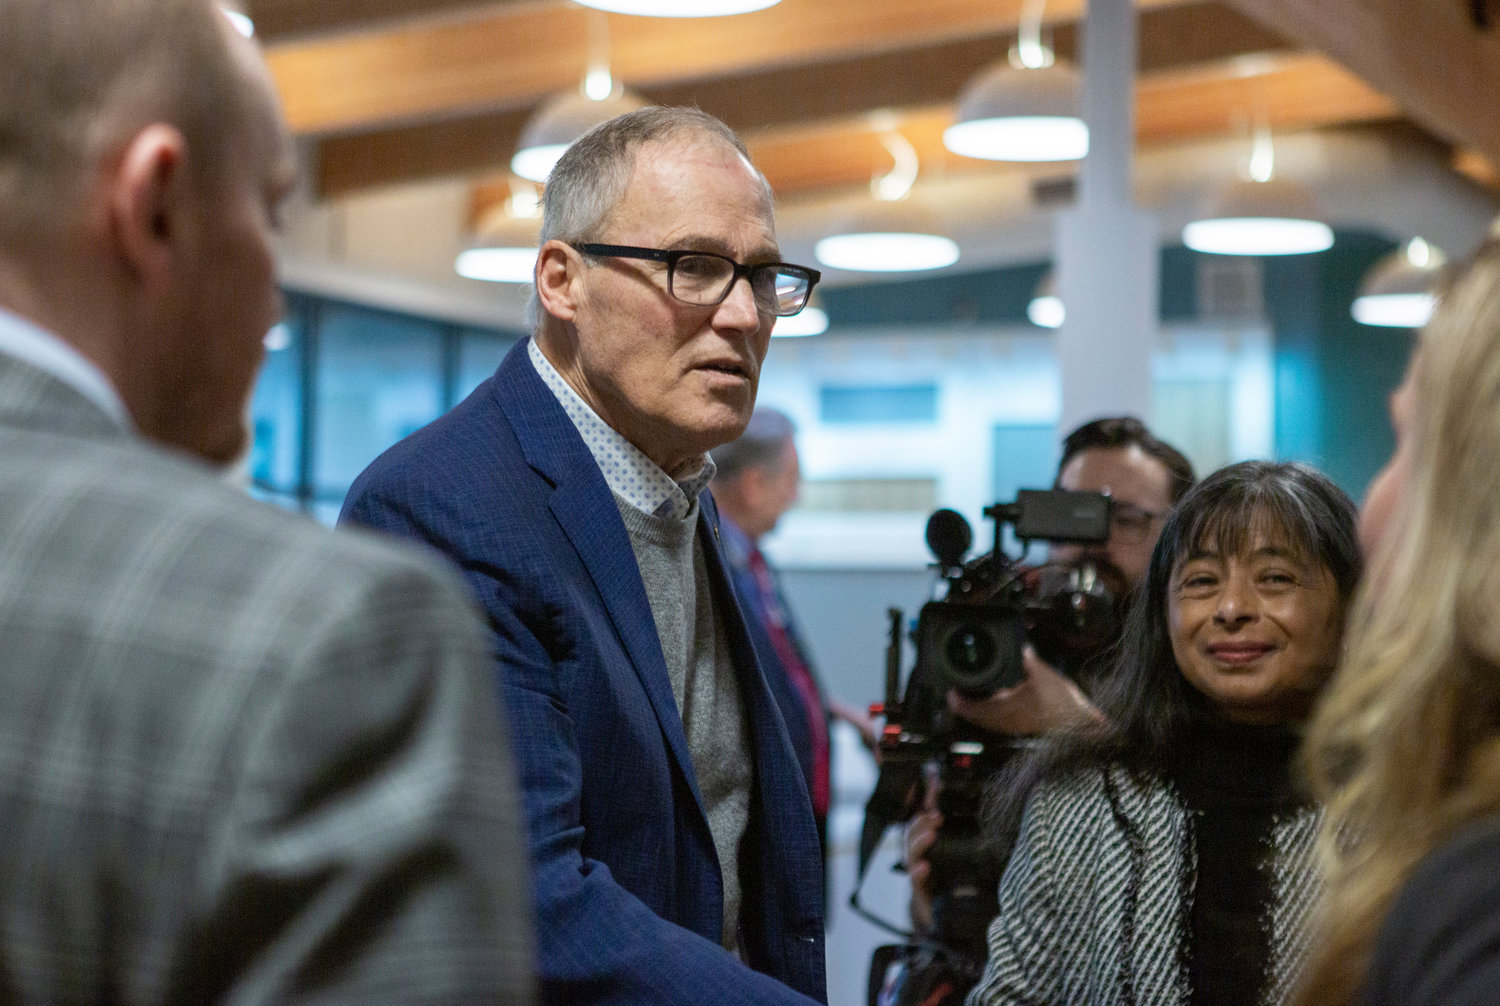 Gov. Jay Inslee speaks to attendees at a grand opening for a new Civil Center for Behavioral Health at Maple Lane School Friday, Jan. 27.